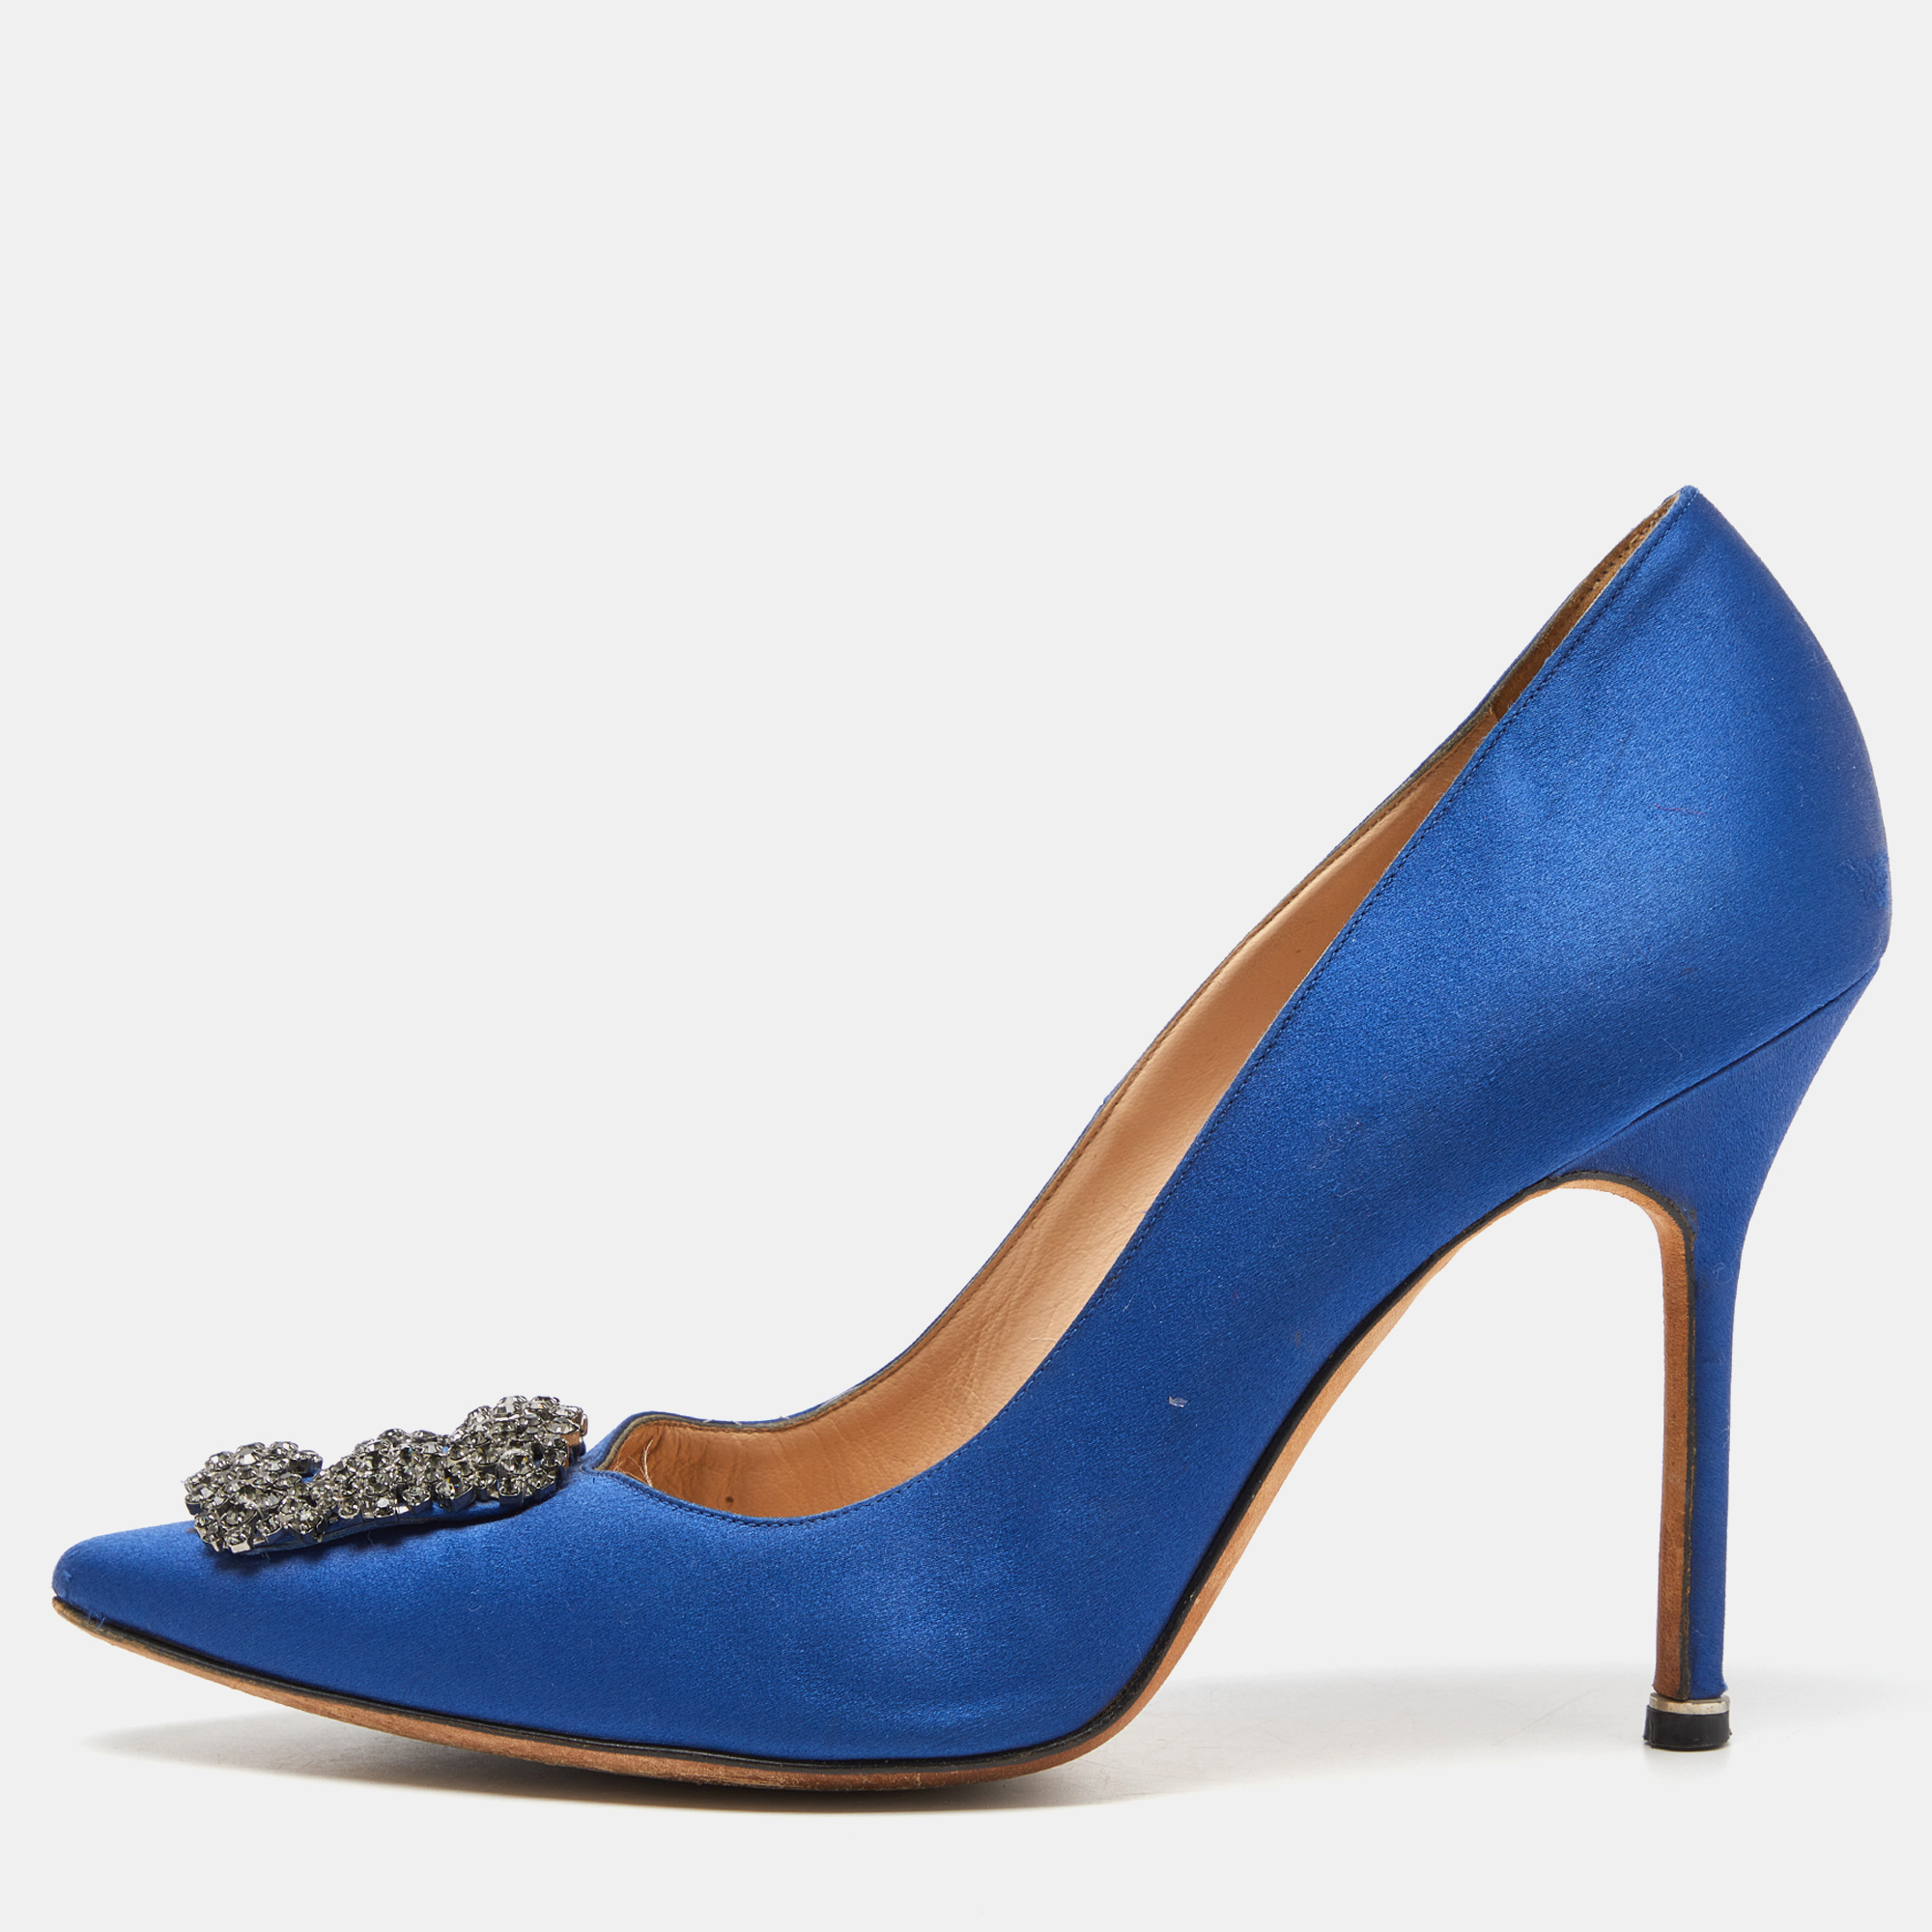 Pre-owned Manolo Blahnik Blue Satin Hangisi Crystal Embellished Pointed Toe Pumps Size 41